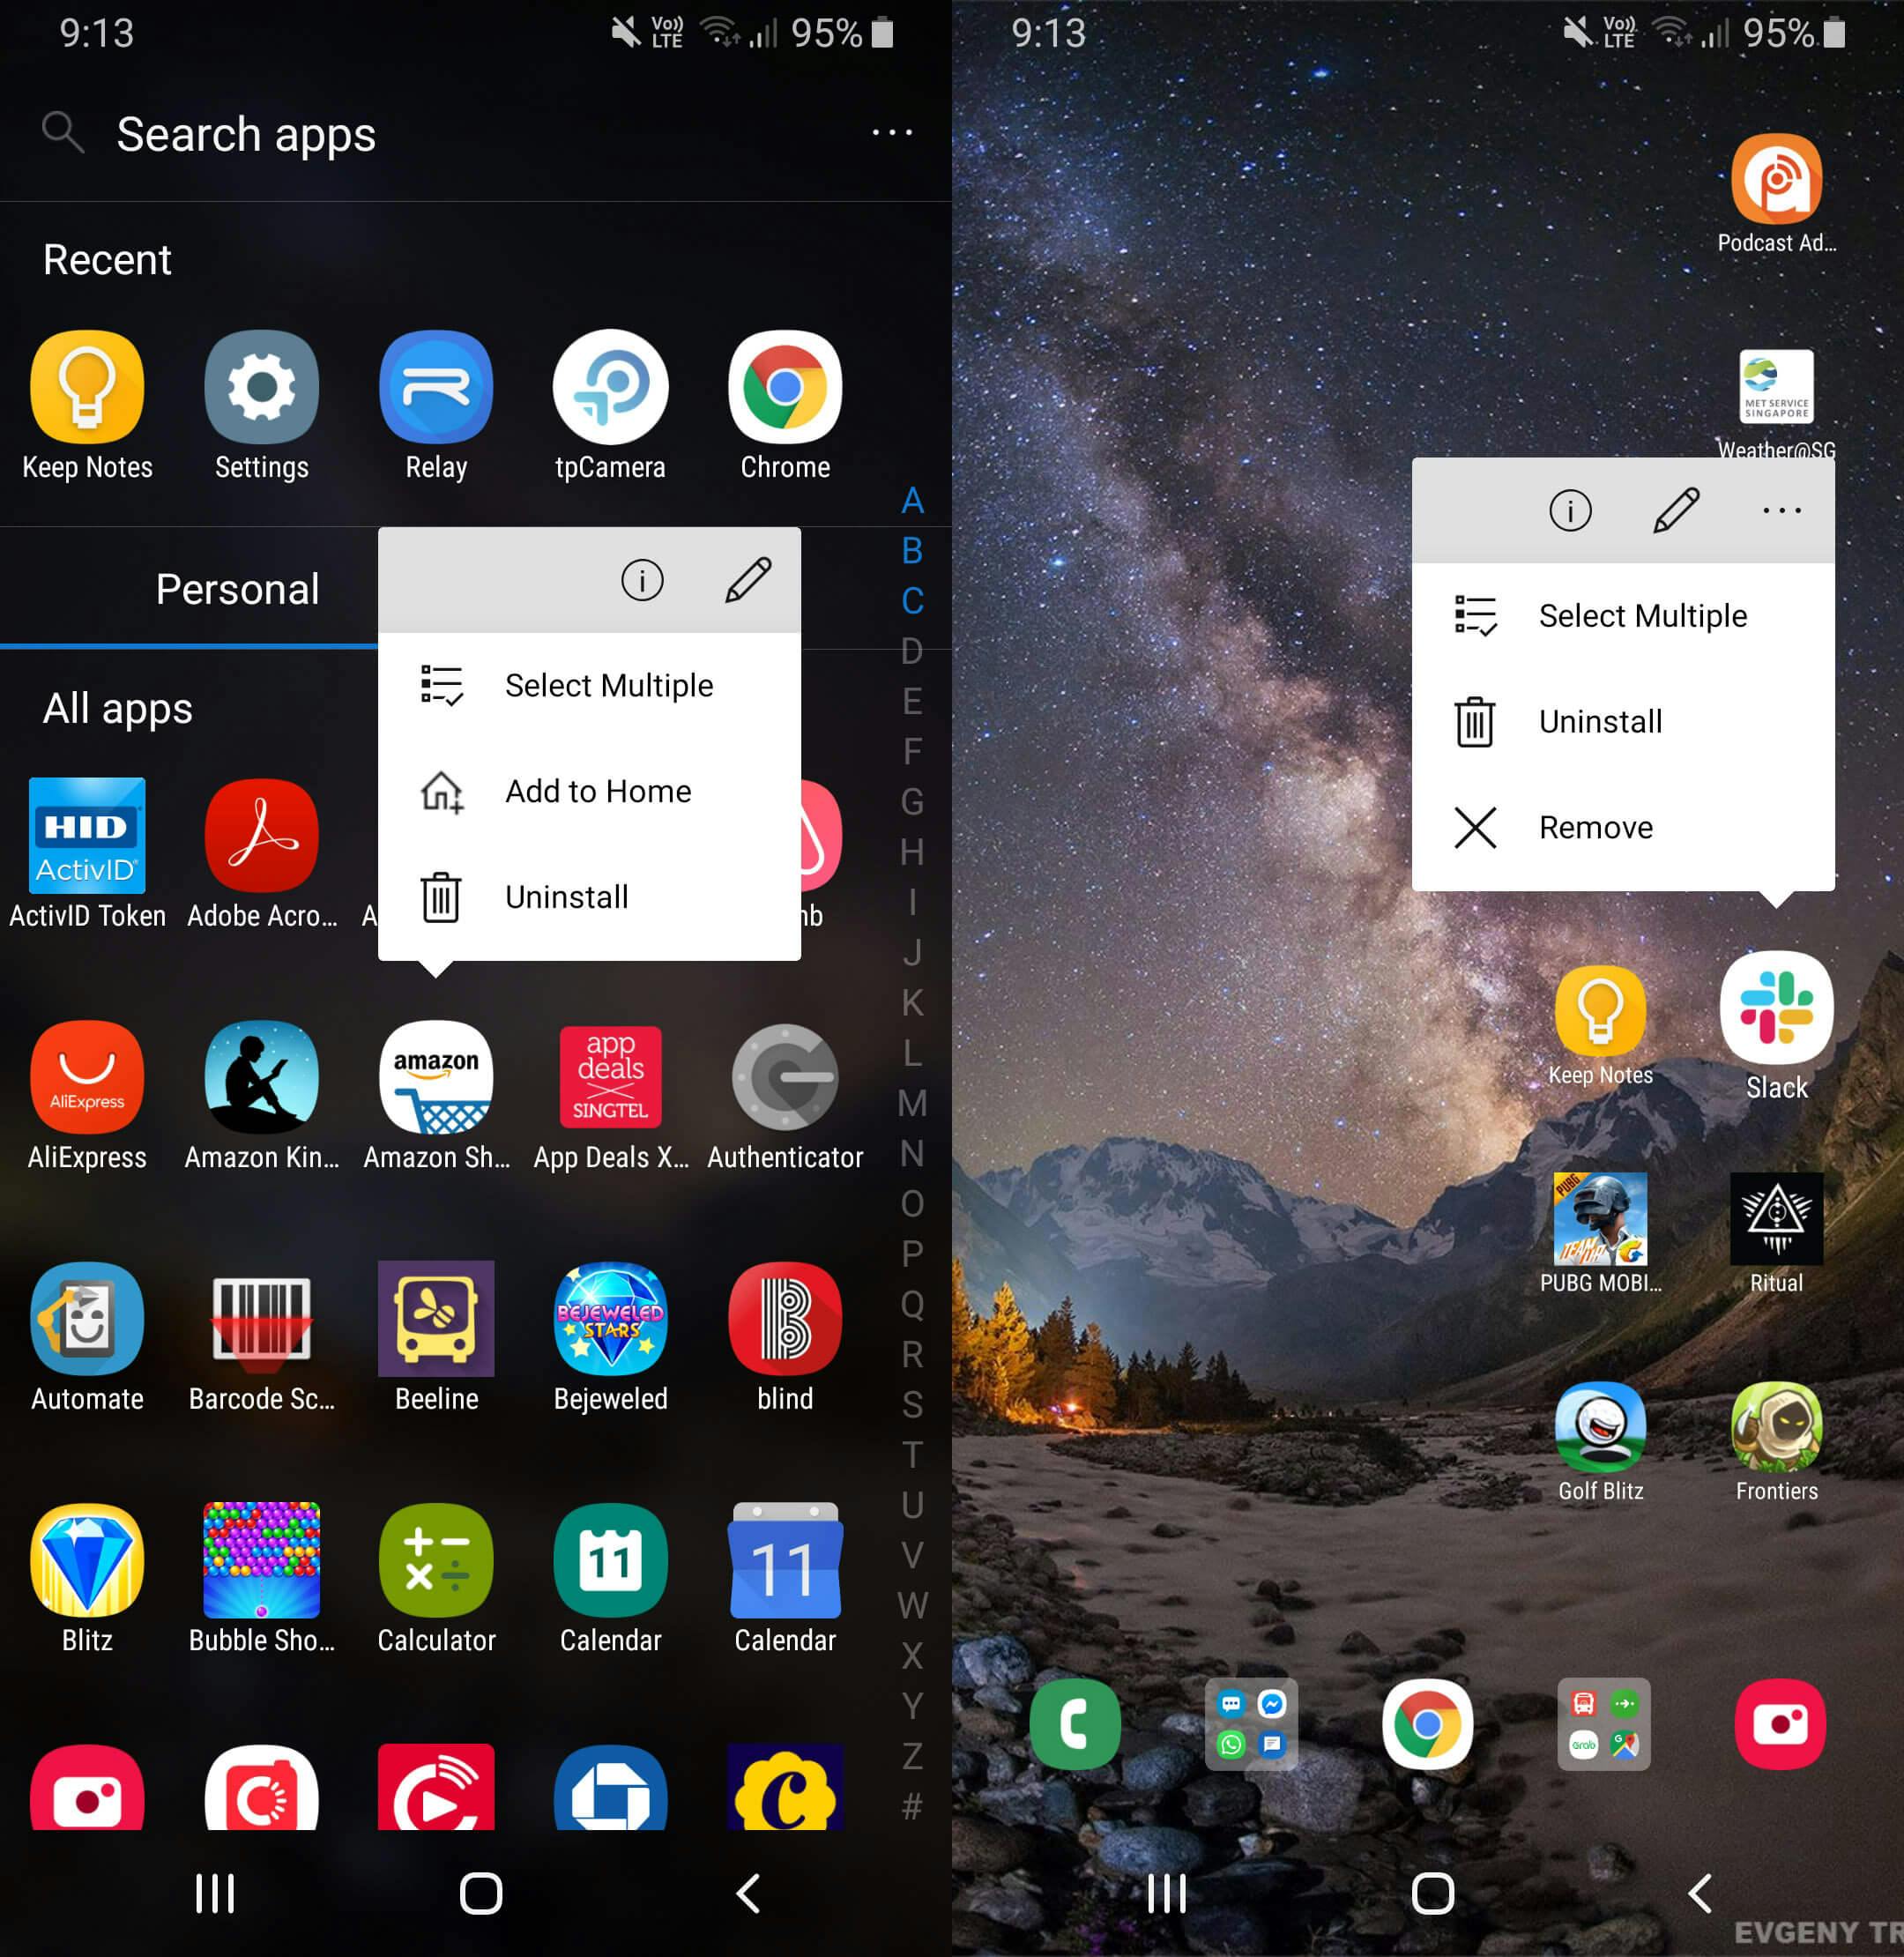 uninstall android apps - delete apps on android phones